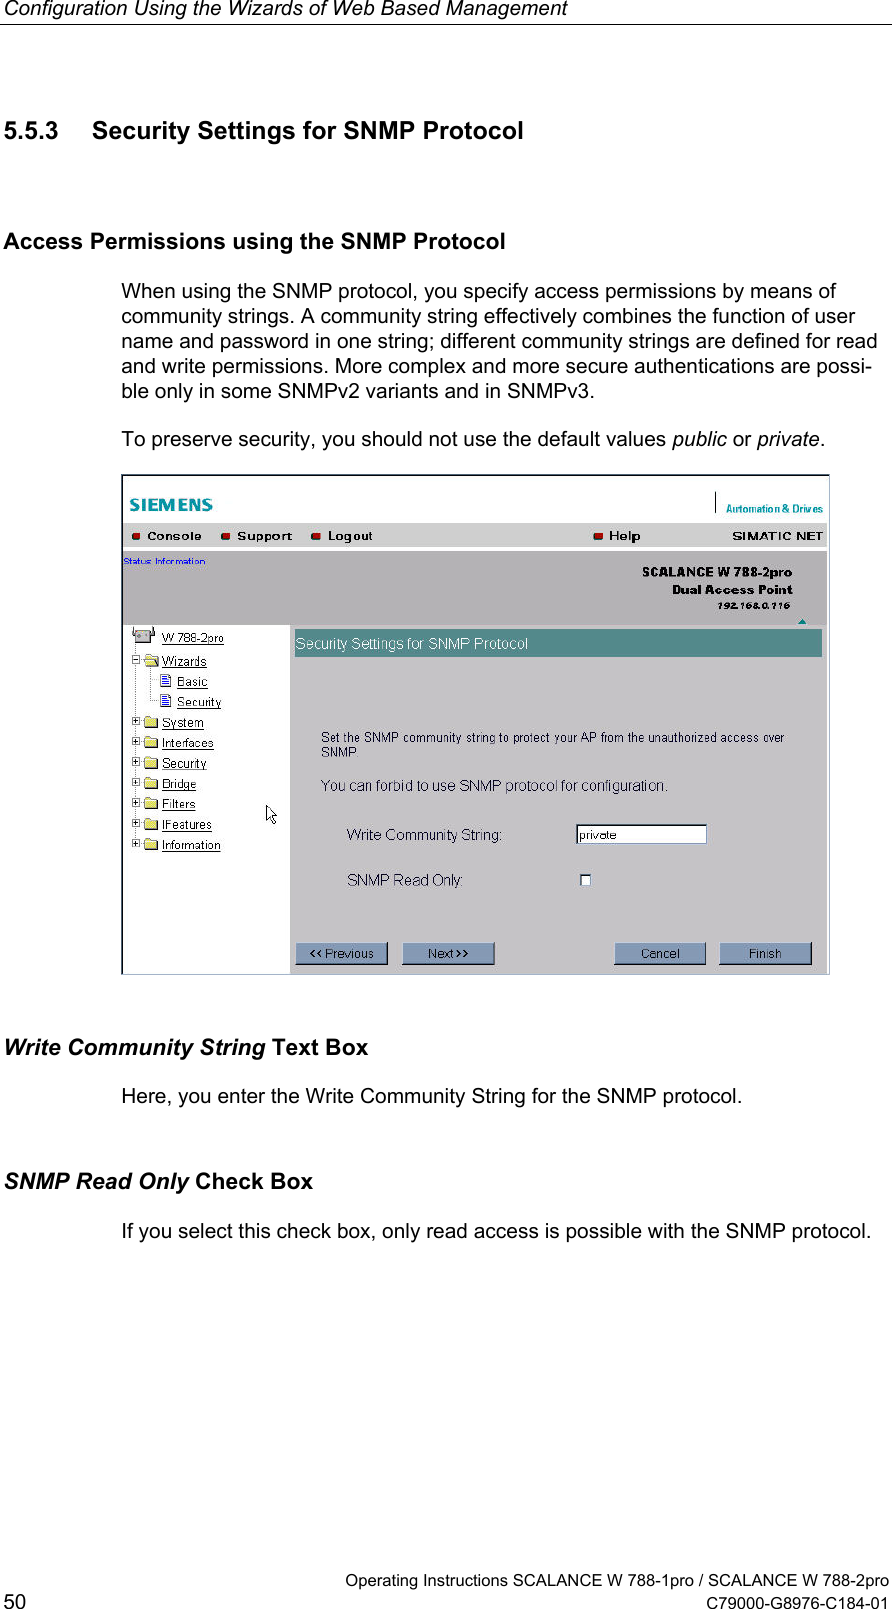 Configuration Using the Wizards of Web Based Management   Operating Instructions SCALANCE W 788-1pro / SCALANCE W 788-2pro 50  C79000-G8976-C184-01 5.5.3  Security Settings for SNMP Protocol Access Permissions using the SNMP Protocol When using the SNMP protocol, you specify access permissions by means of community strings. A community string effectively combines the function of user name and password in one string; different community strings are defined for read and write permissions. More complex and more secure authentications are possi-ble only in some SNMPv2 variants and in SNMPv3. To preserve security, you should not use the default values public or private.  Write Community String Text Box Here, you enter the Write Community String for the SNMP protocol. SNMP Read Only Check Box If you select this check box, only read access is possible with the SNMP protocol. 